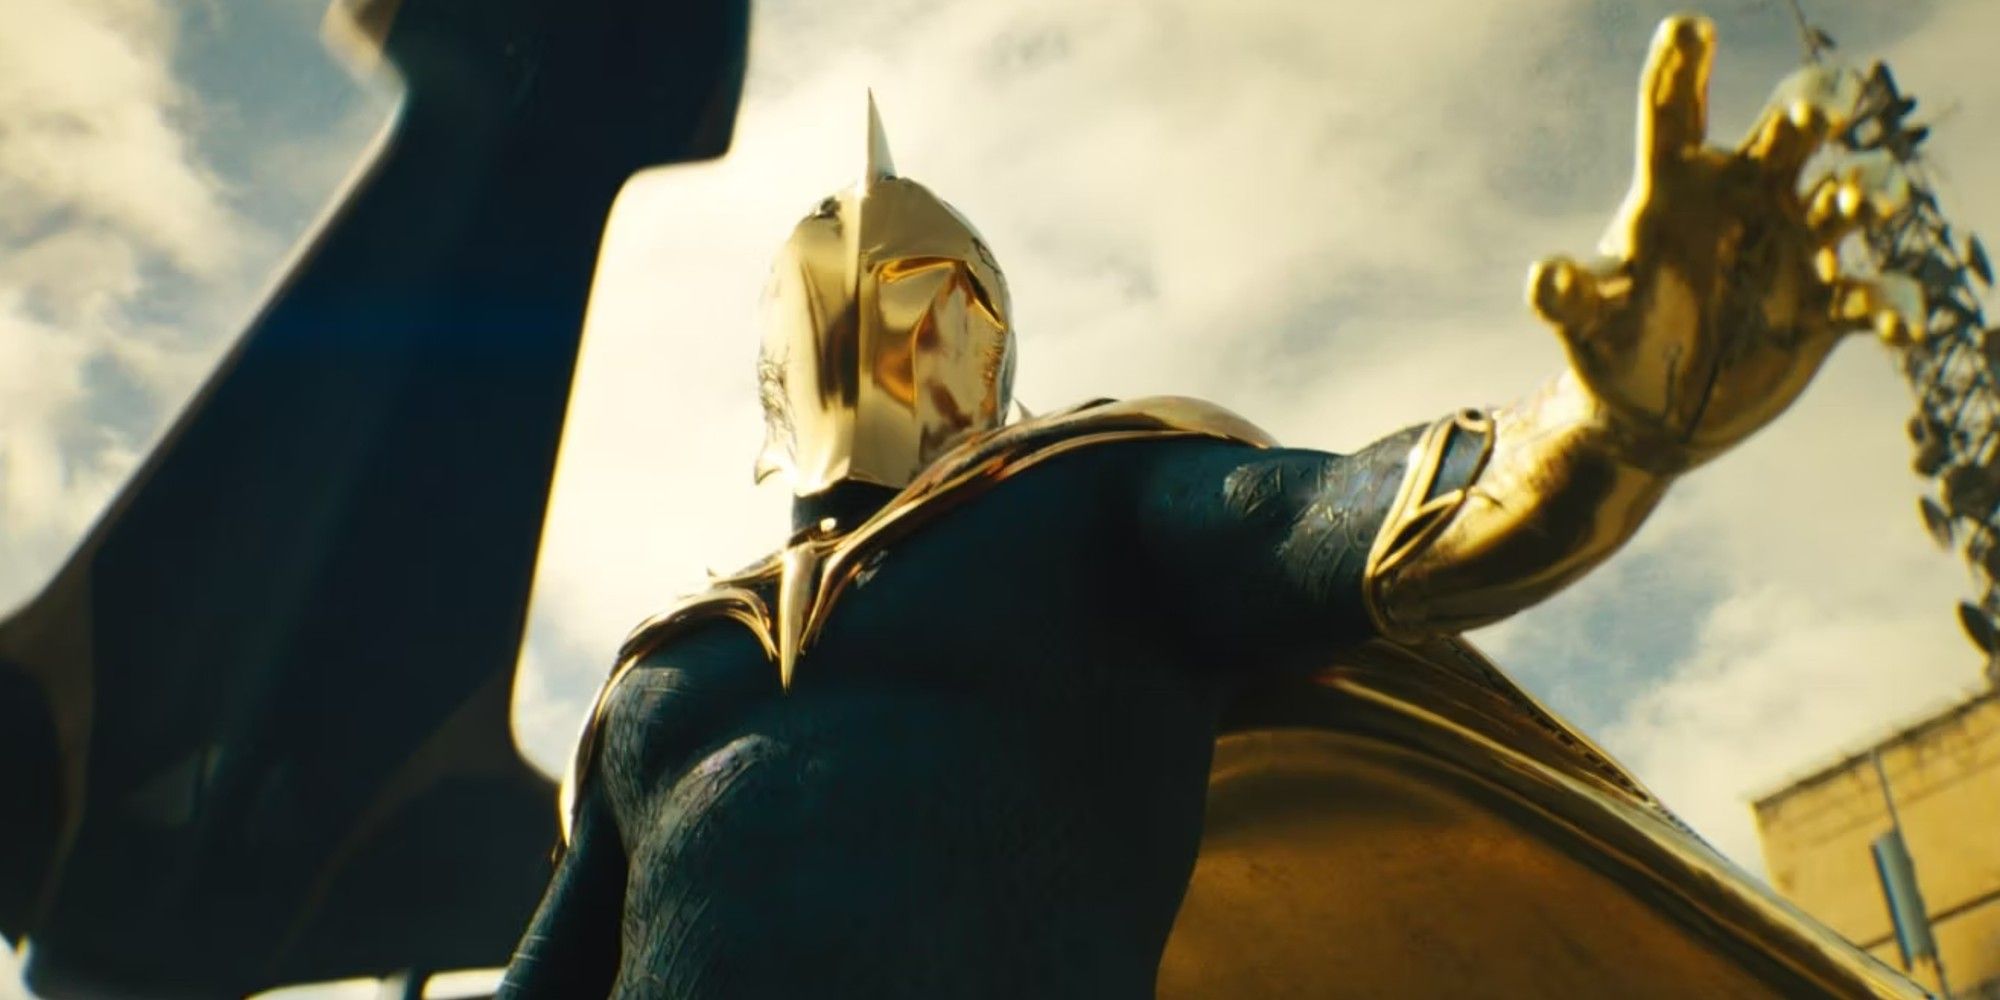 Doctor Fate in full costume and helmet